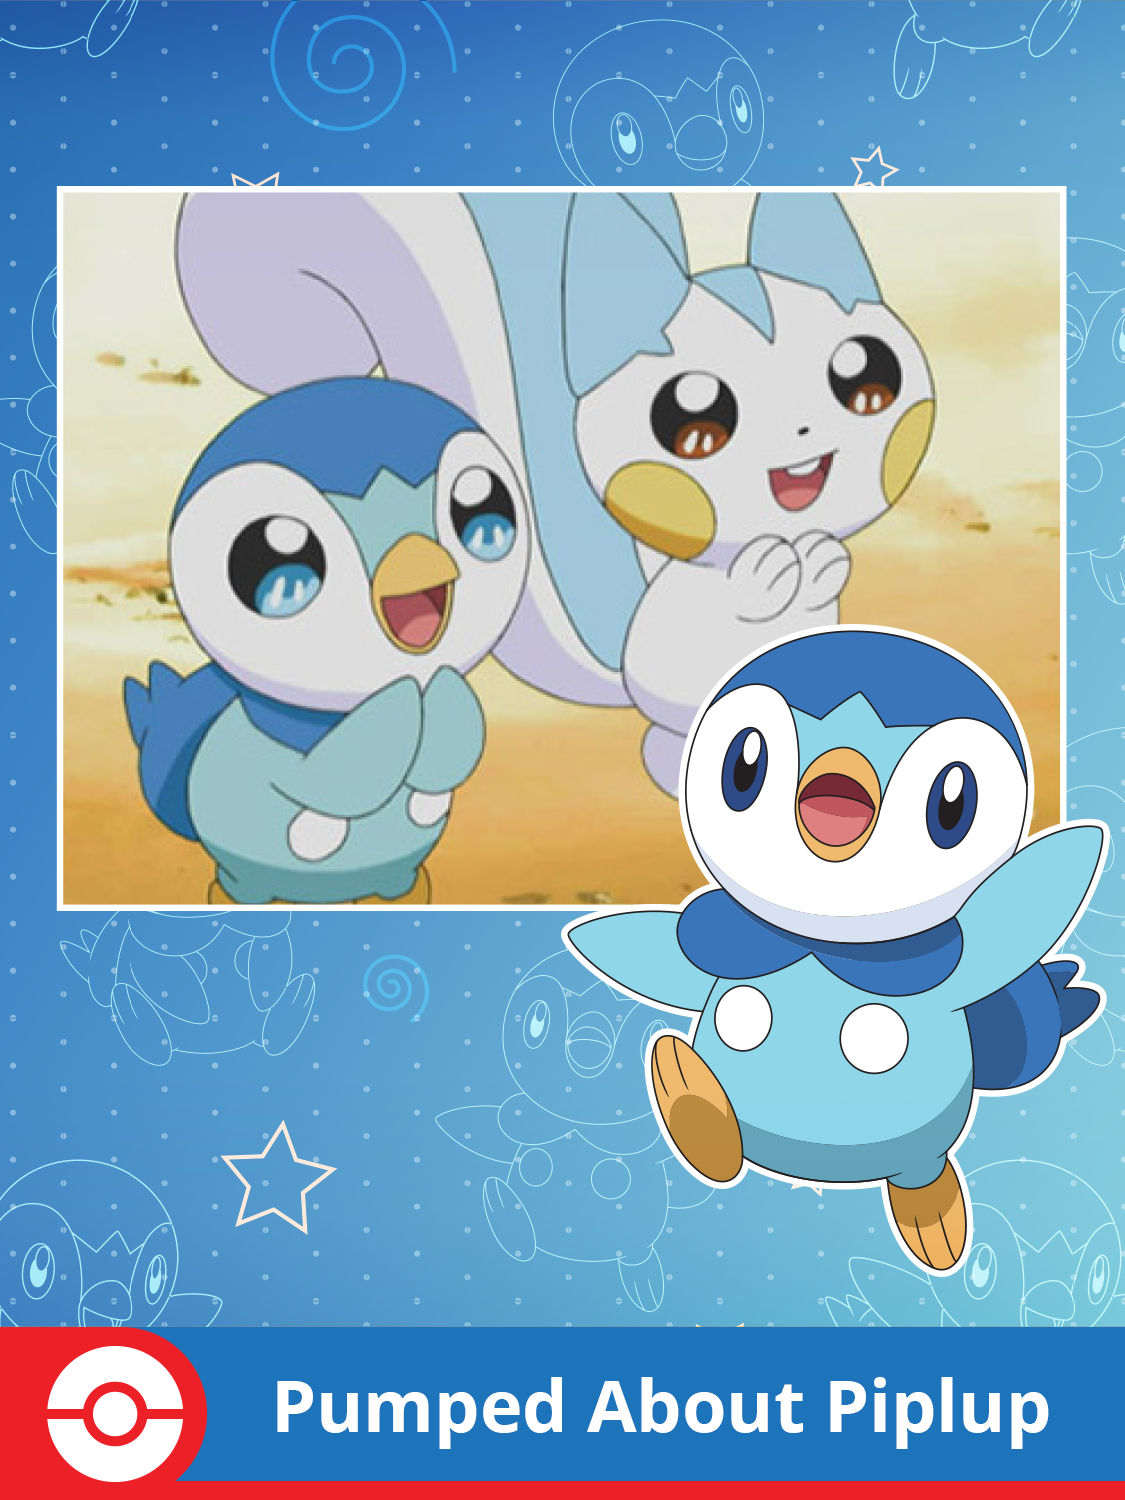 Pumped About Piplup